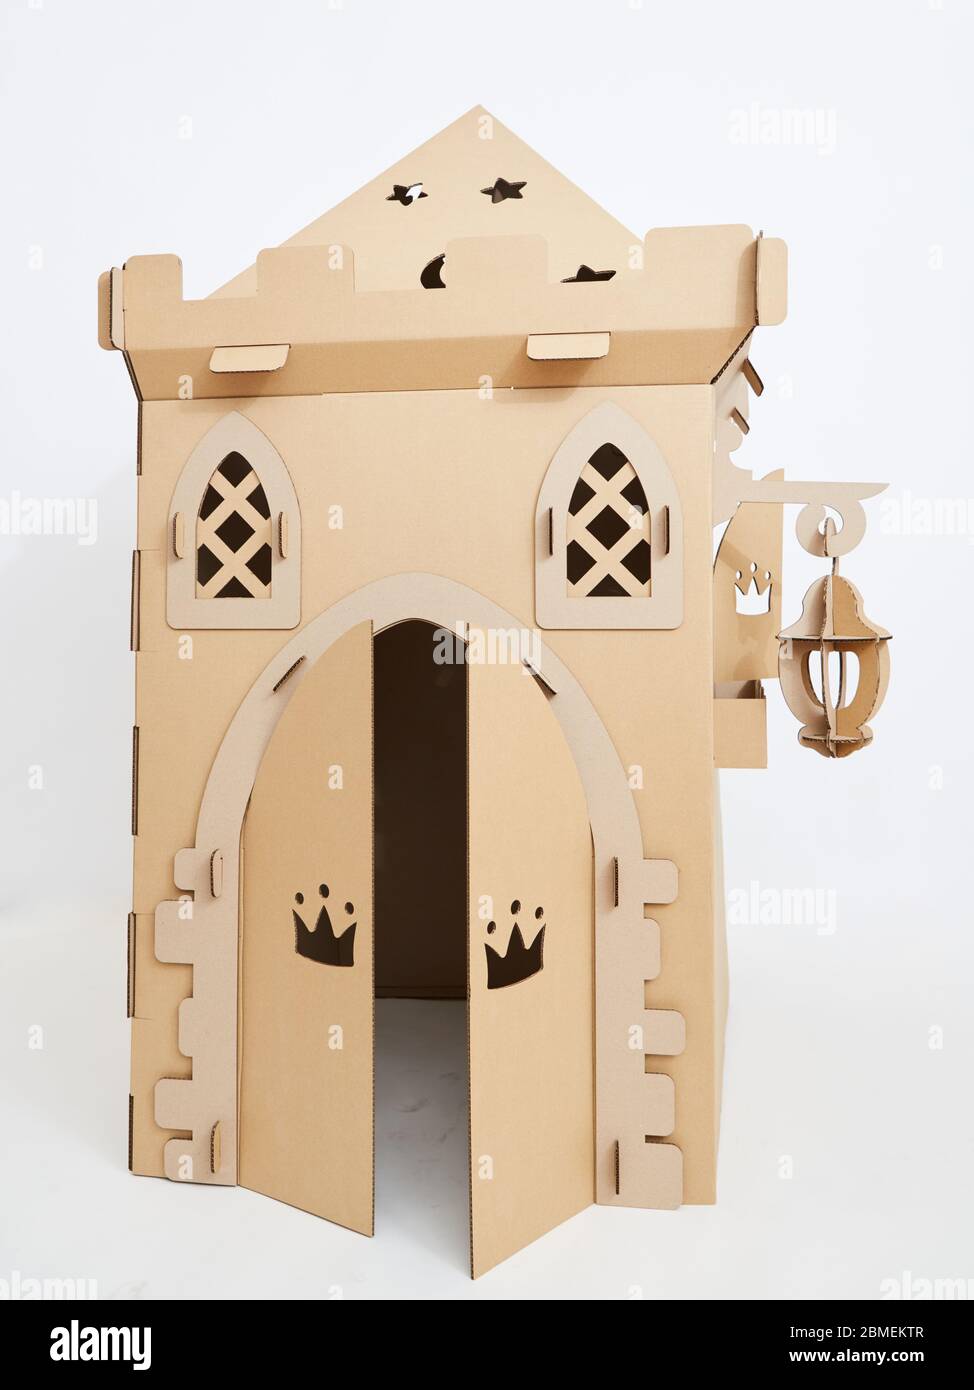 photo of medieval decorations made of cardboards Stock Photo